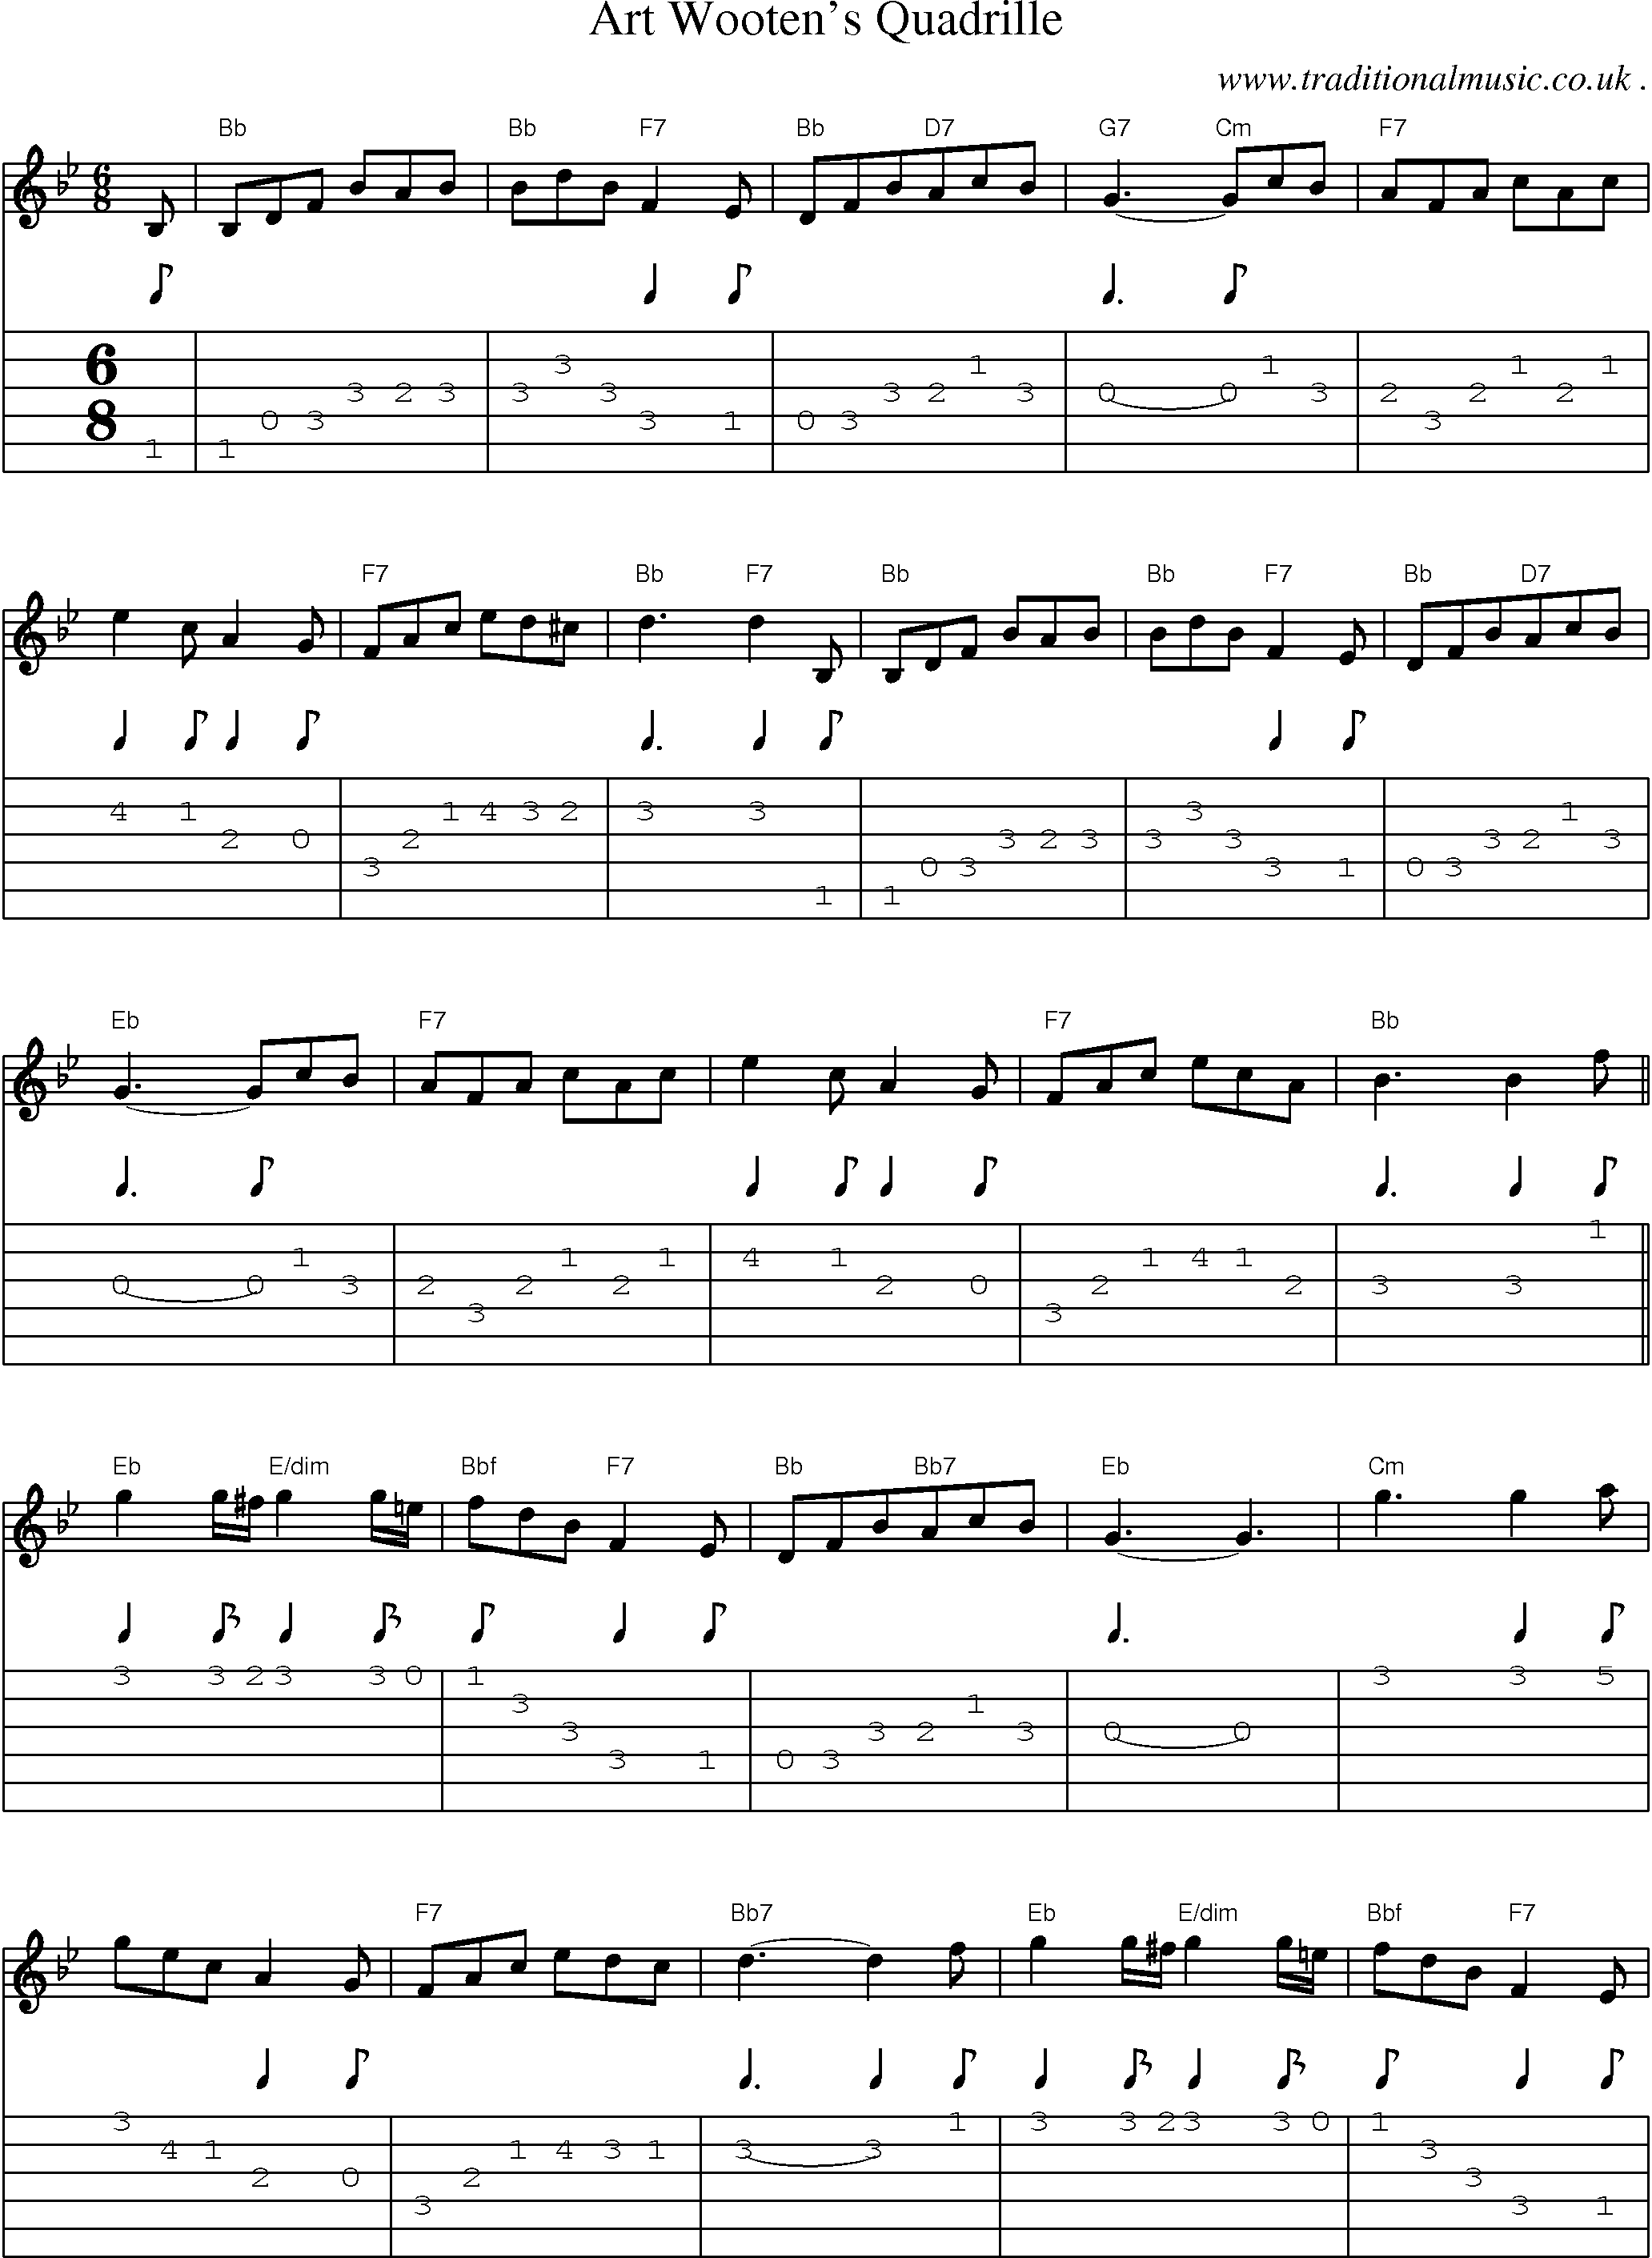 Sheet-Music and Guitar Tabs for Art Wootens Quadrille